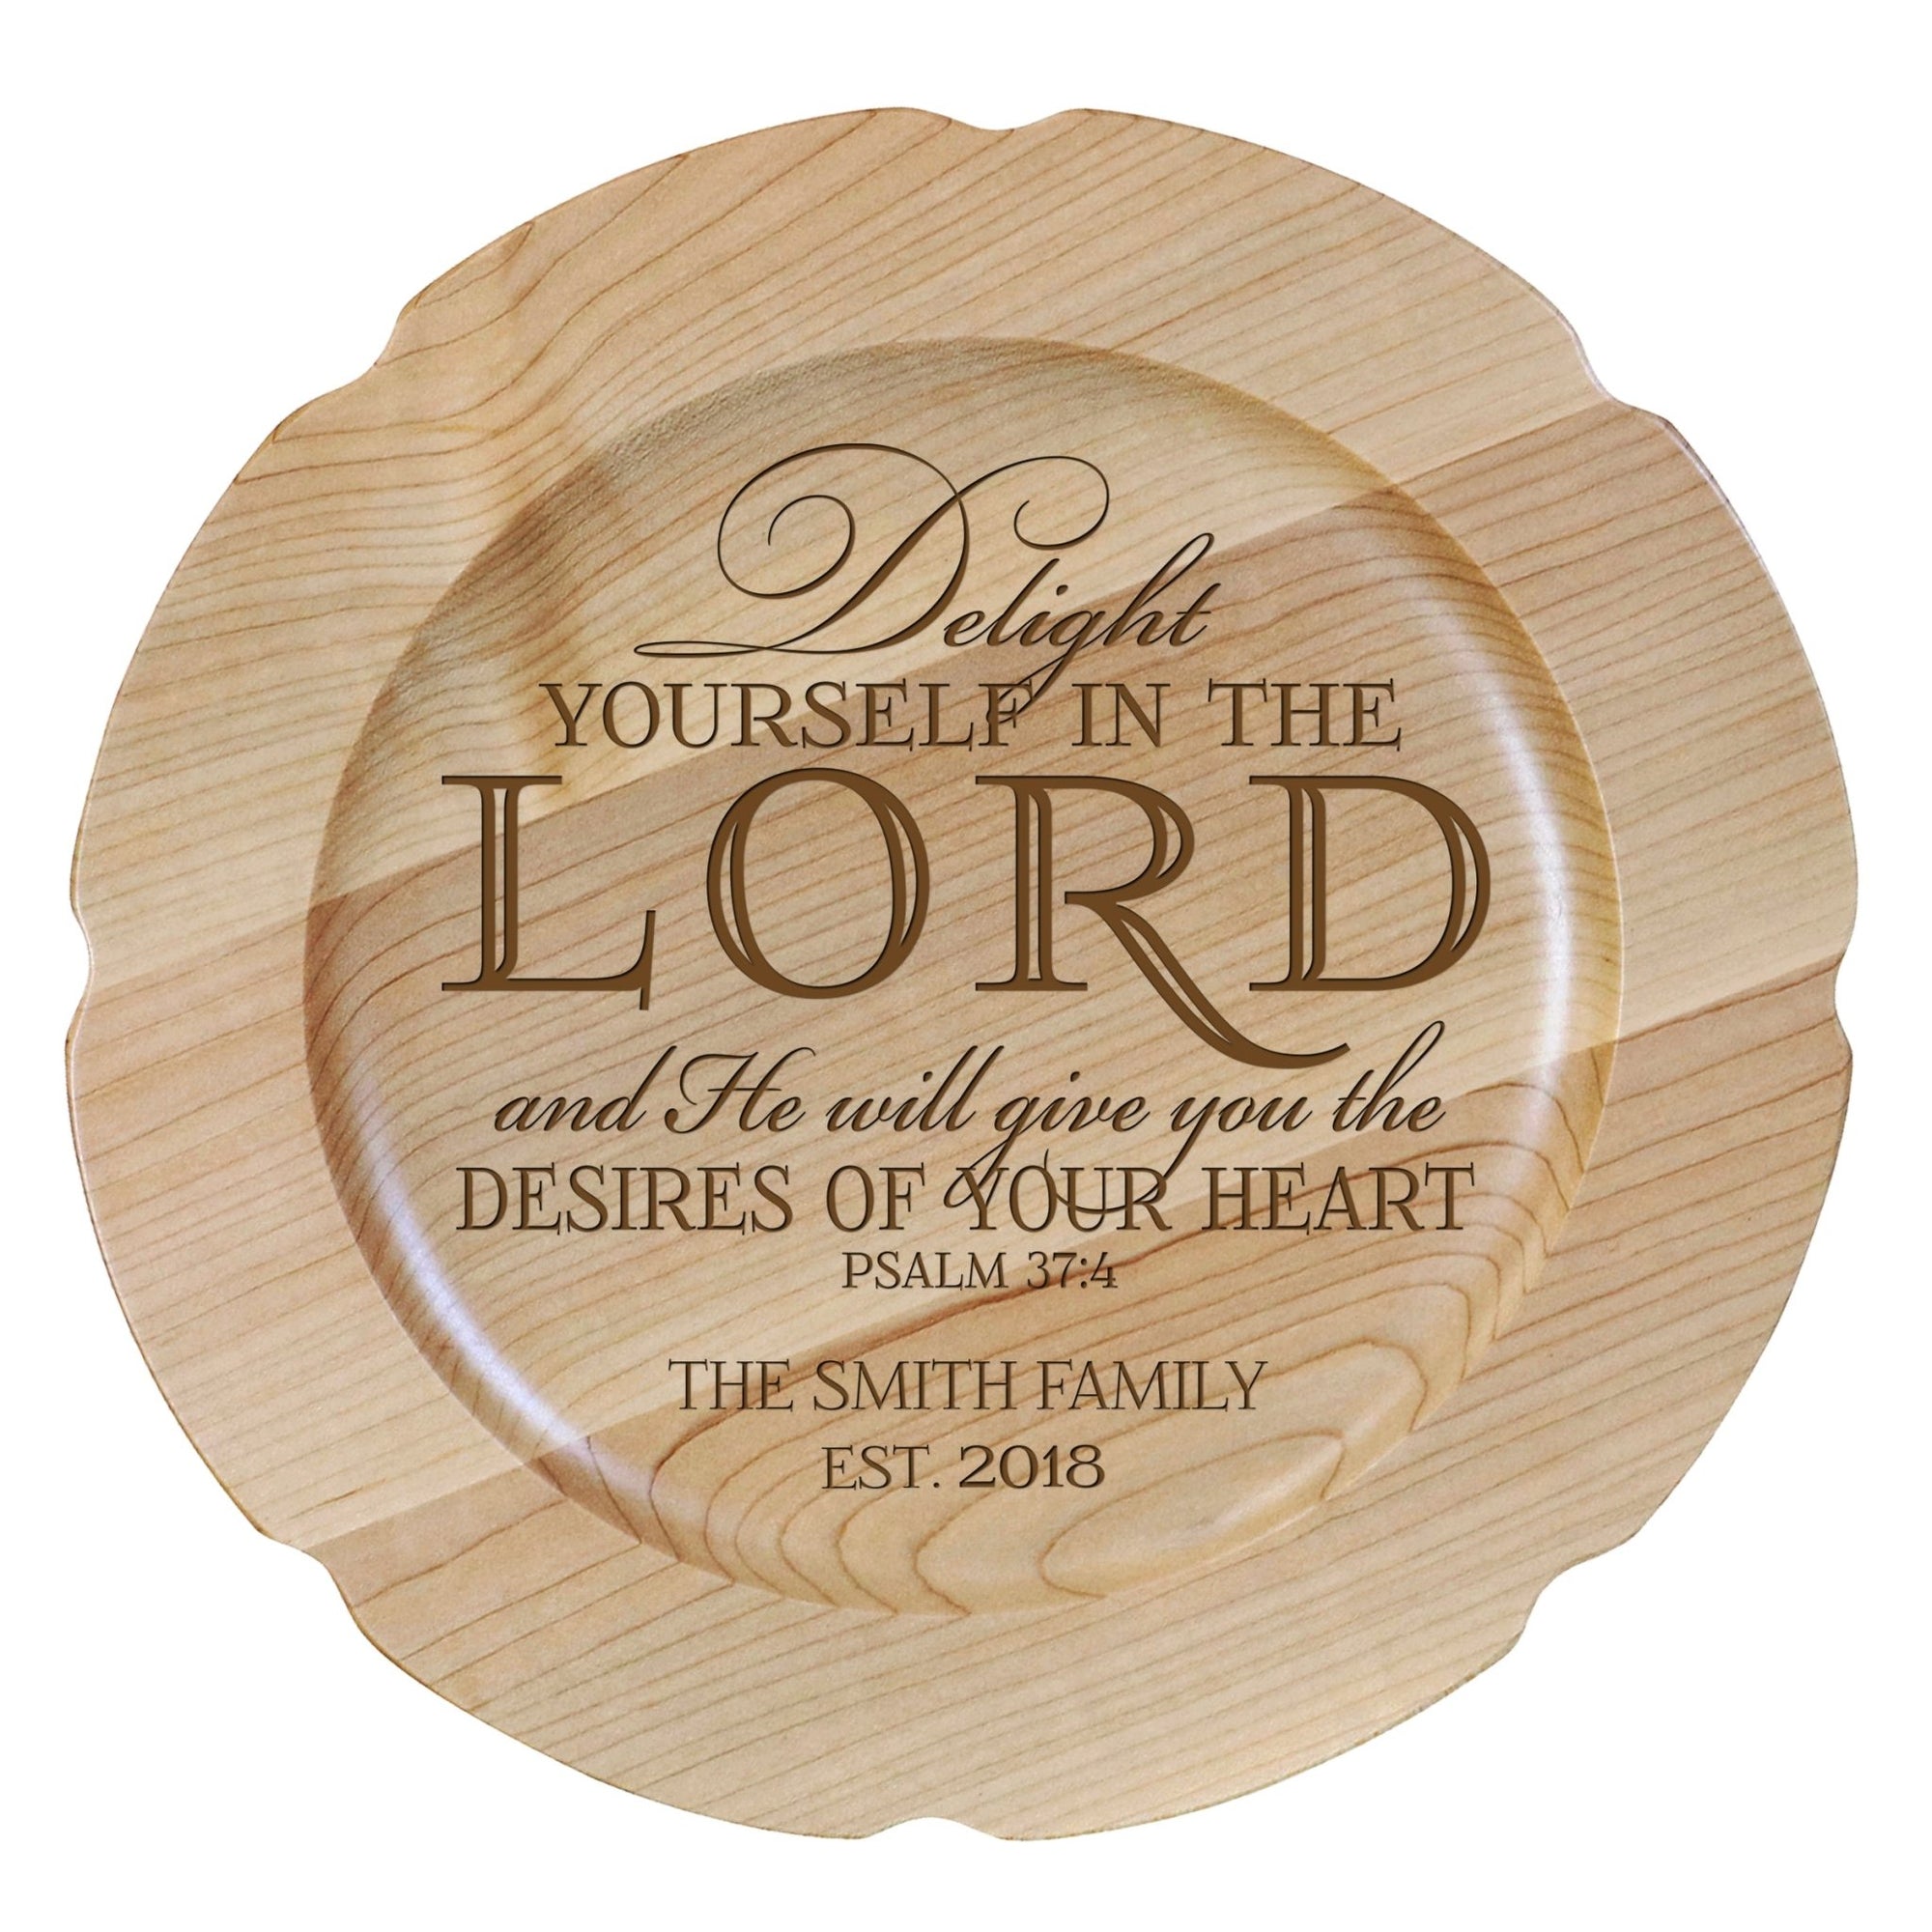 Personalized Inspirational Plates With Quotes - Delight Yourself - LifeSong Milestones